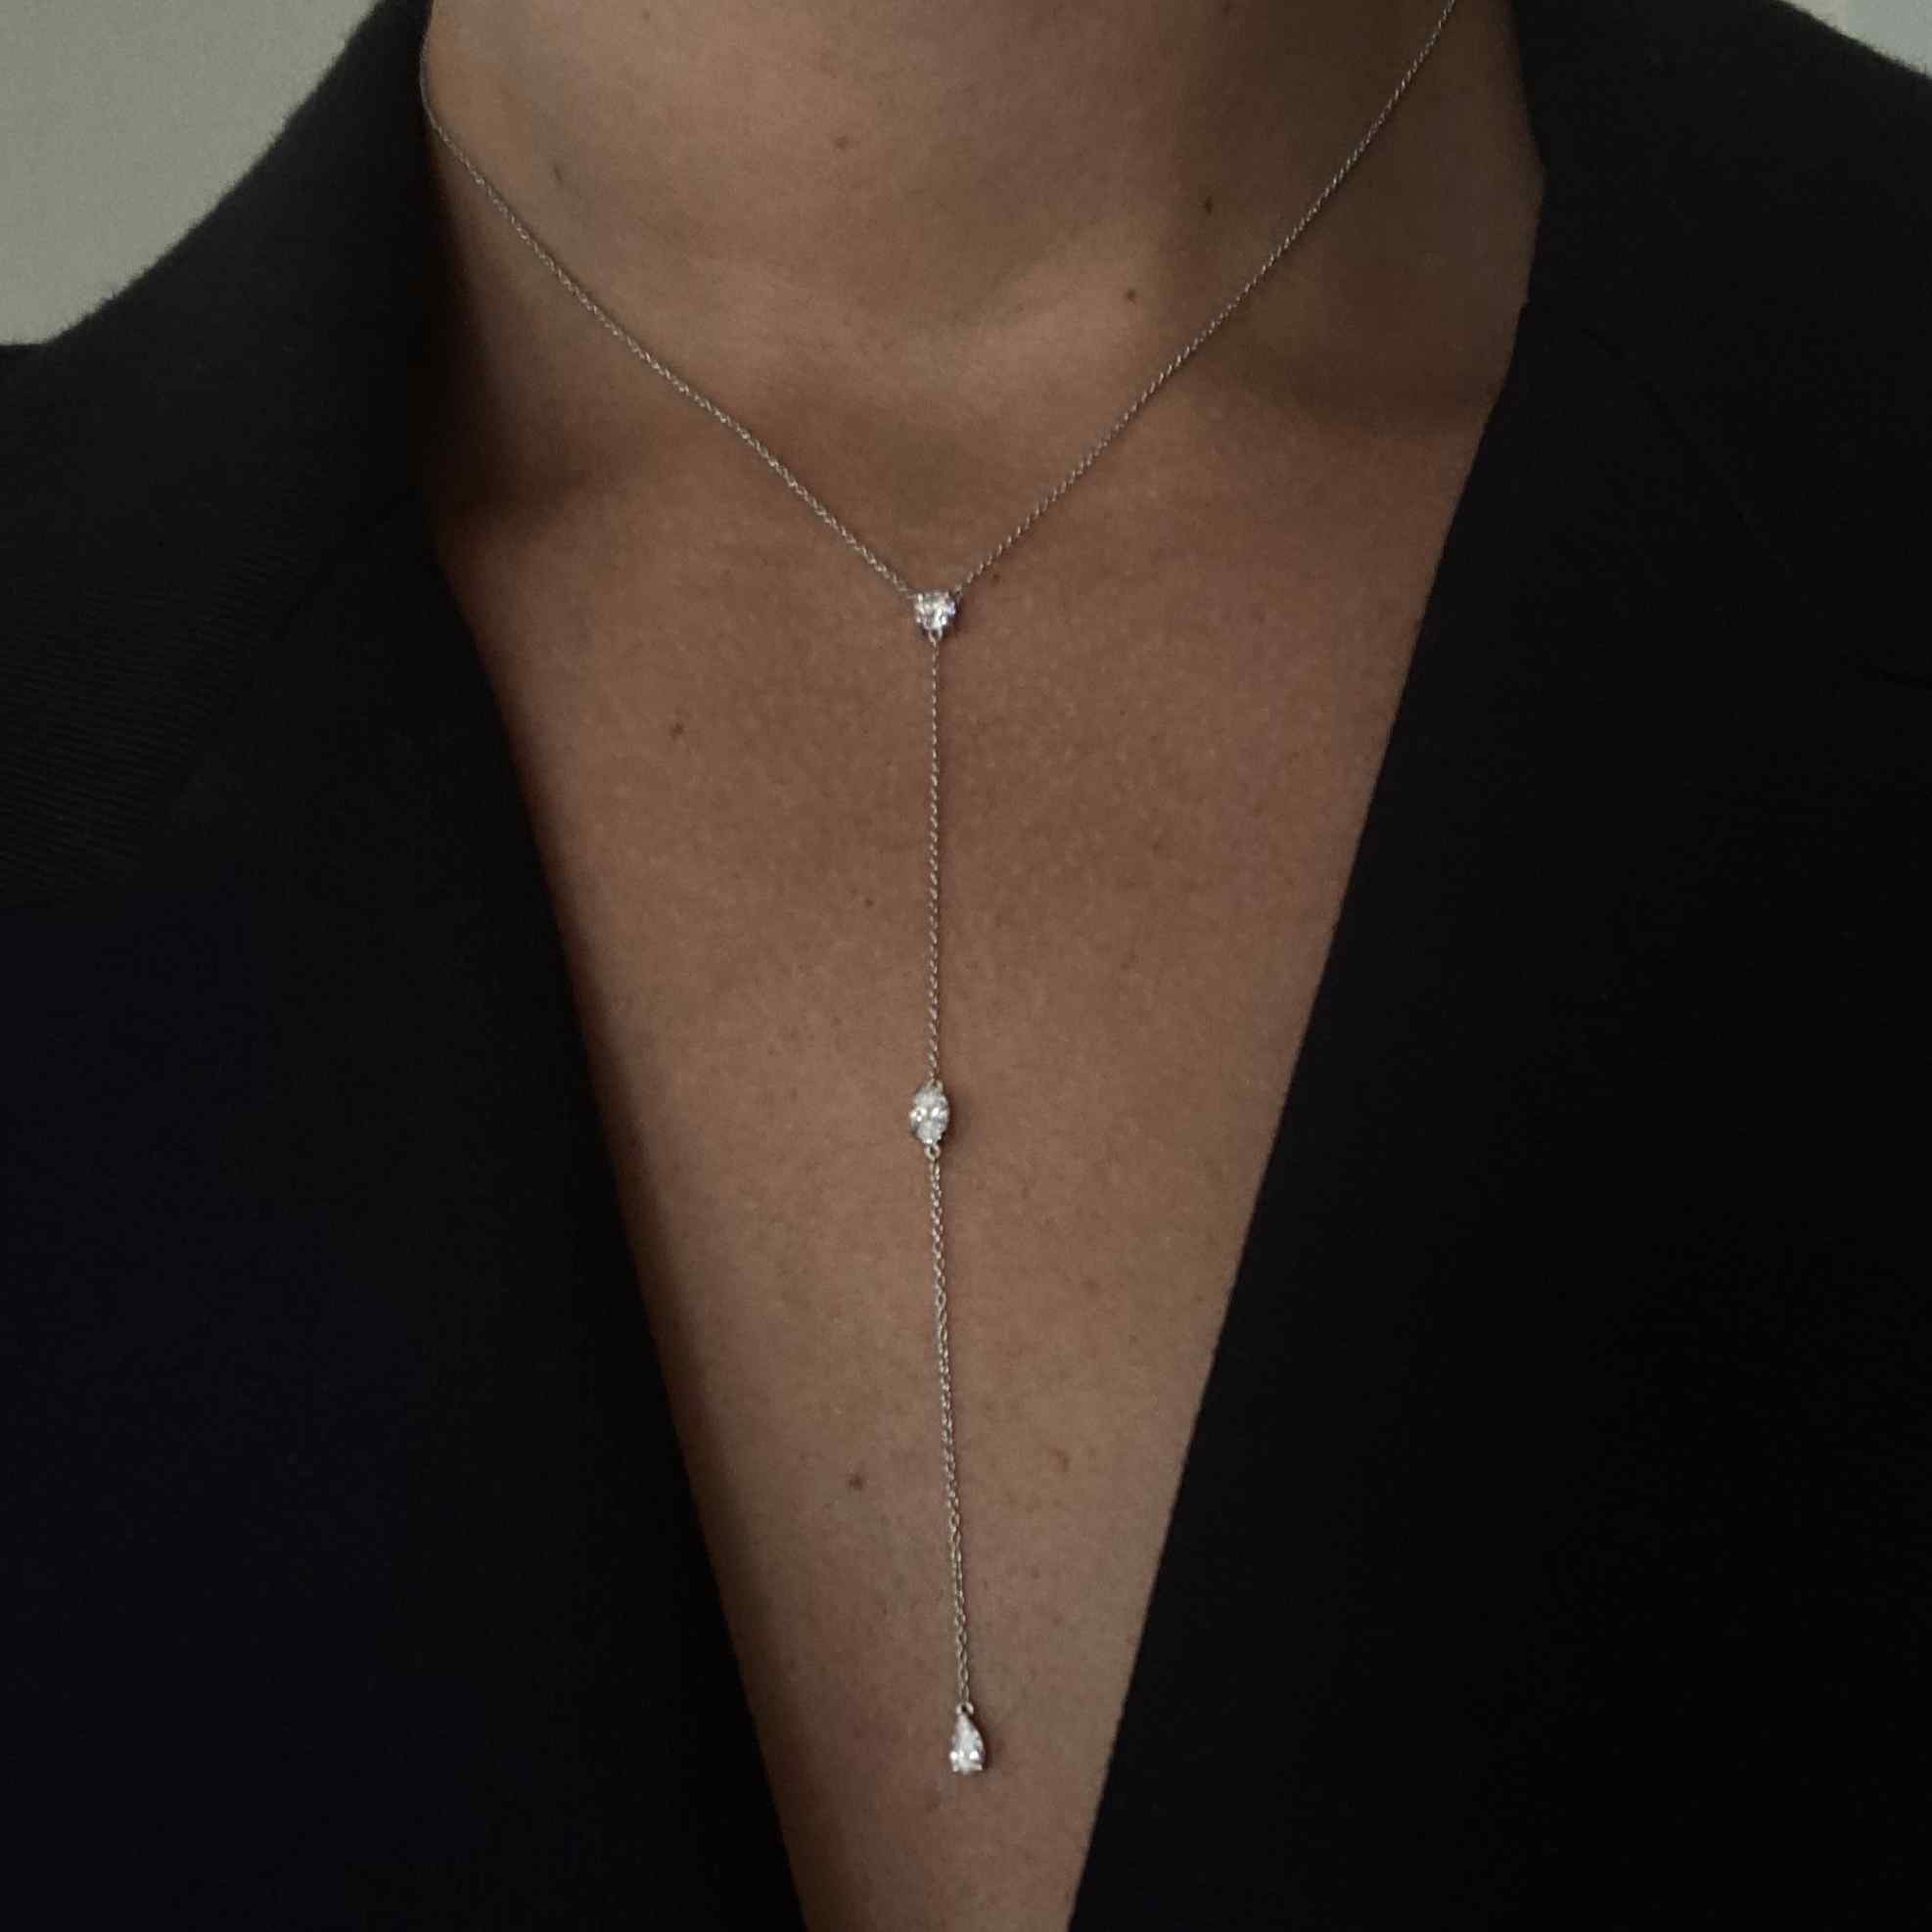 Three 0.25ct diamonds are strung along a 18k gold chain. Diamond shapes from top to bottom are: Round, Marquise, Pear. The collar of the necklace measures 16 inches (40cm); the length of the drop is 4 inches (10cm). To customize, please write to our Atelier. 18k White Gold shown here.